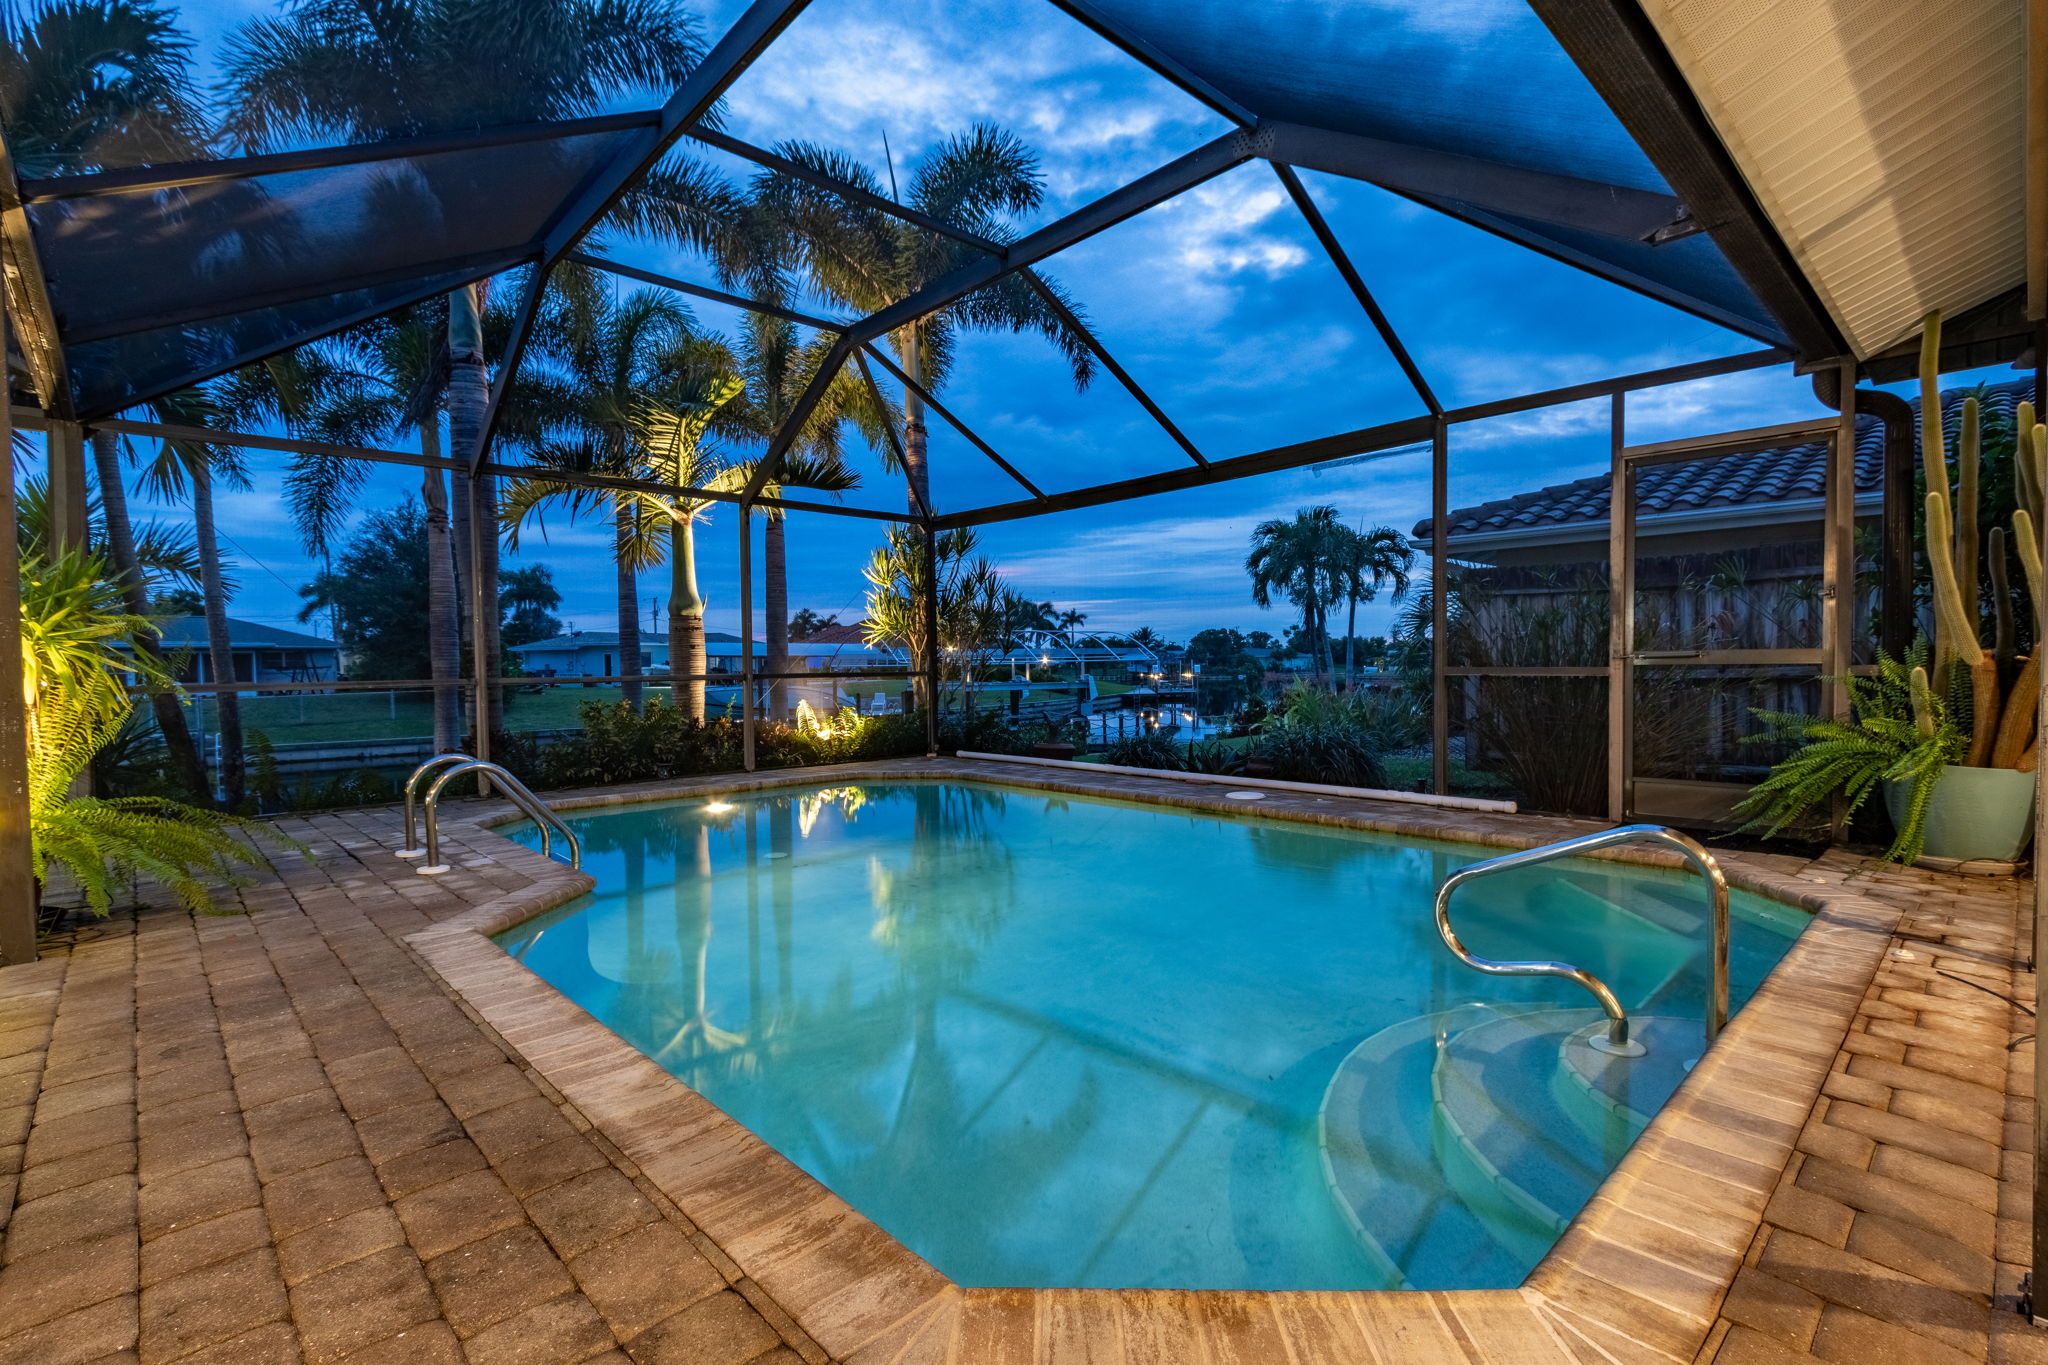 Property Image 1 - Little’s Slice of Heaven, Cape Coral